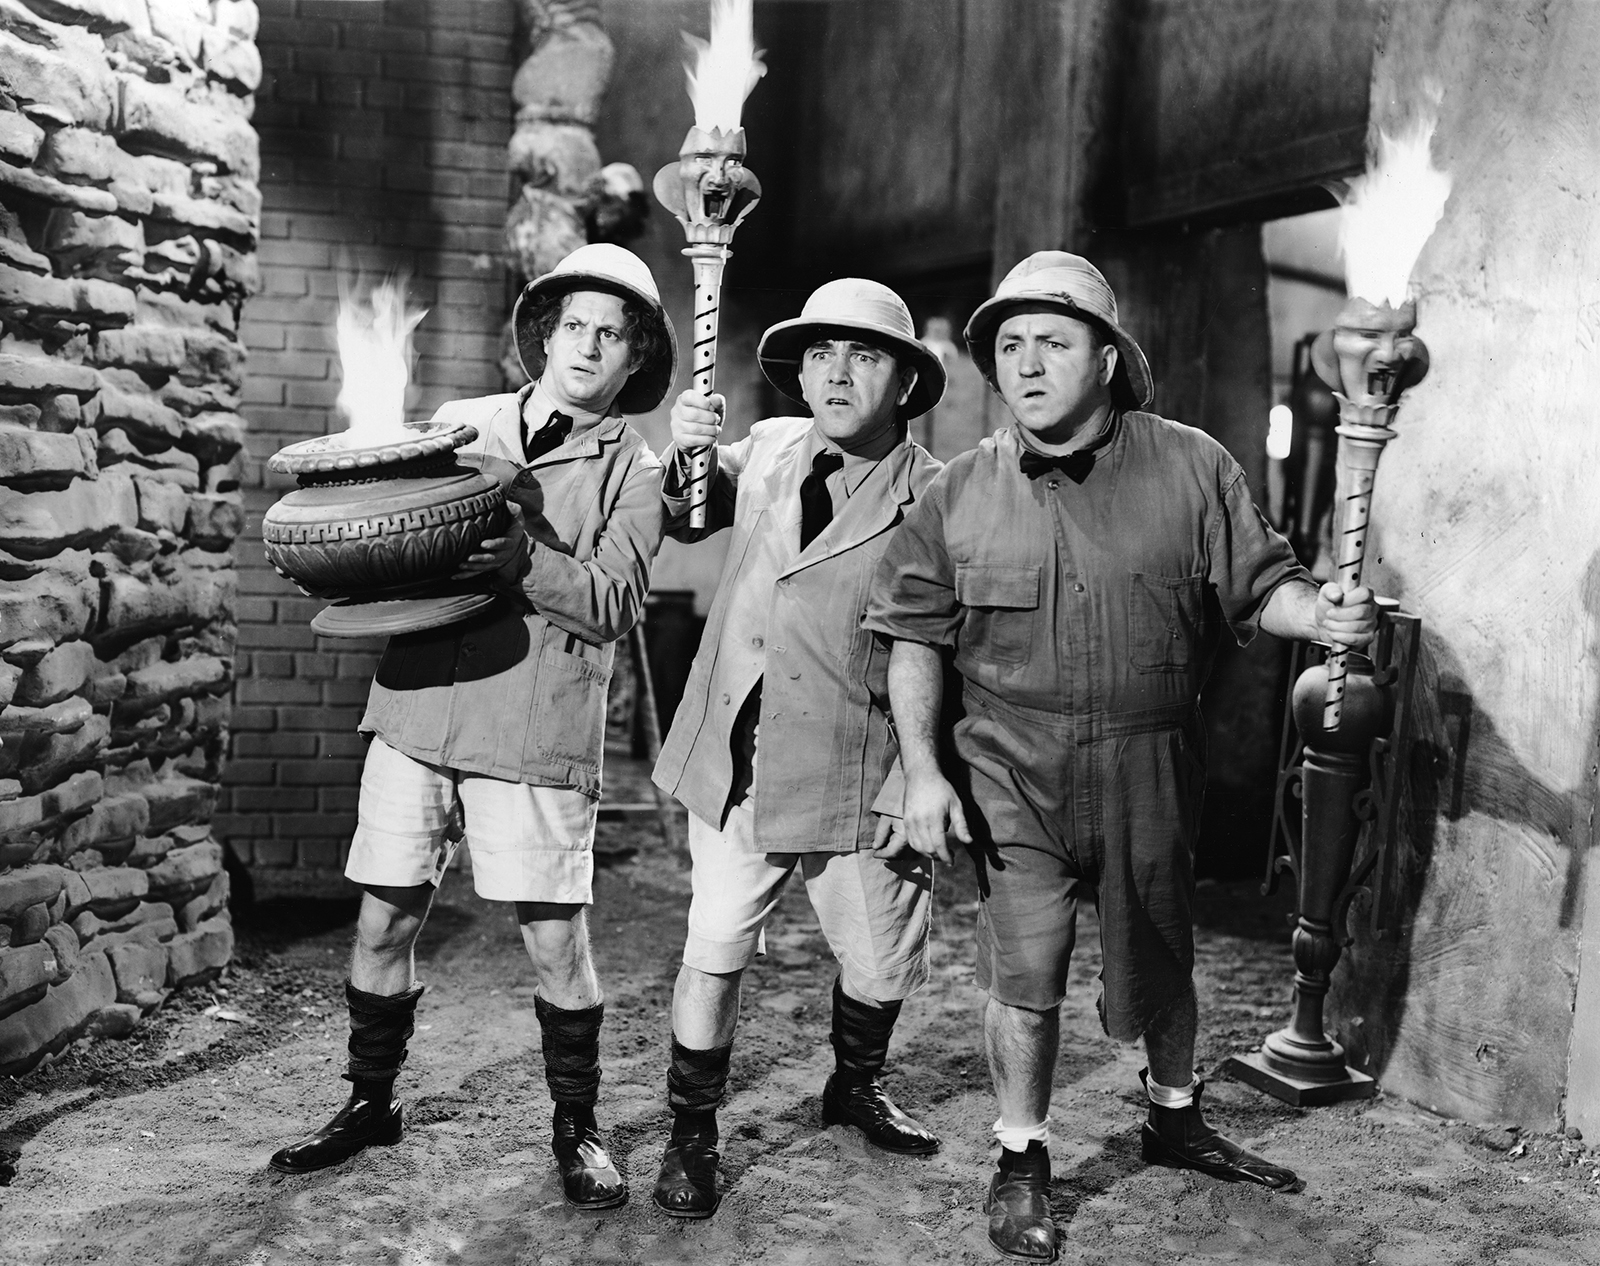 The Three Stooges | Names, Characters, History, & Films | Britannica